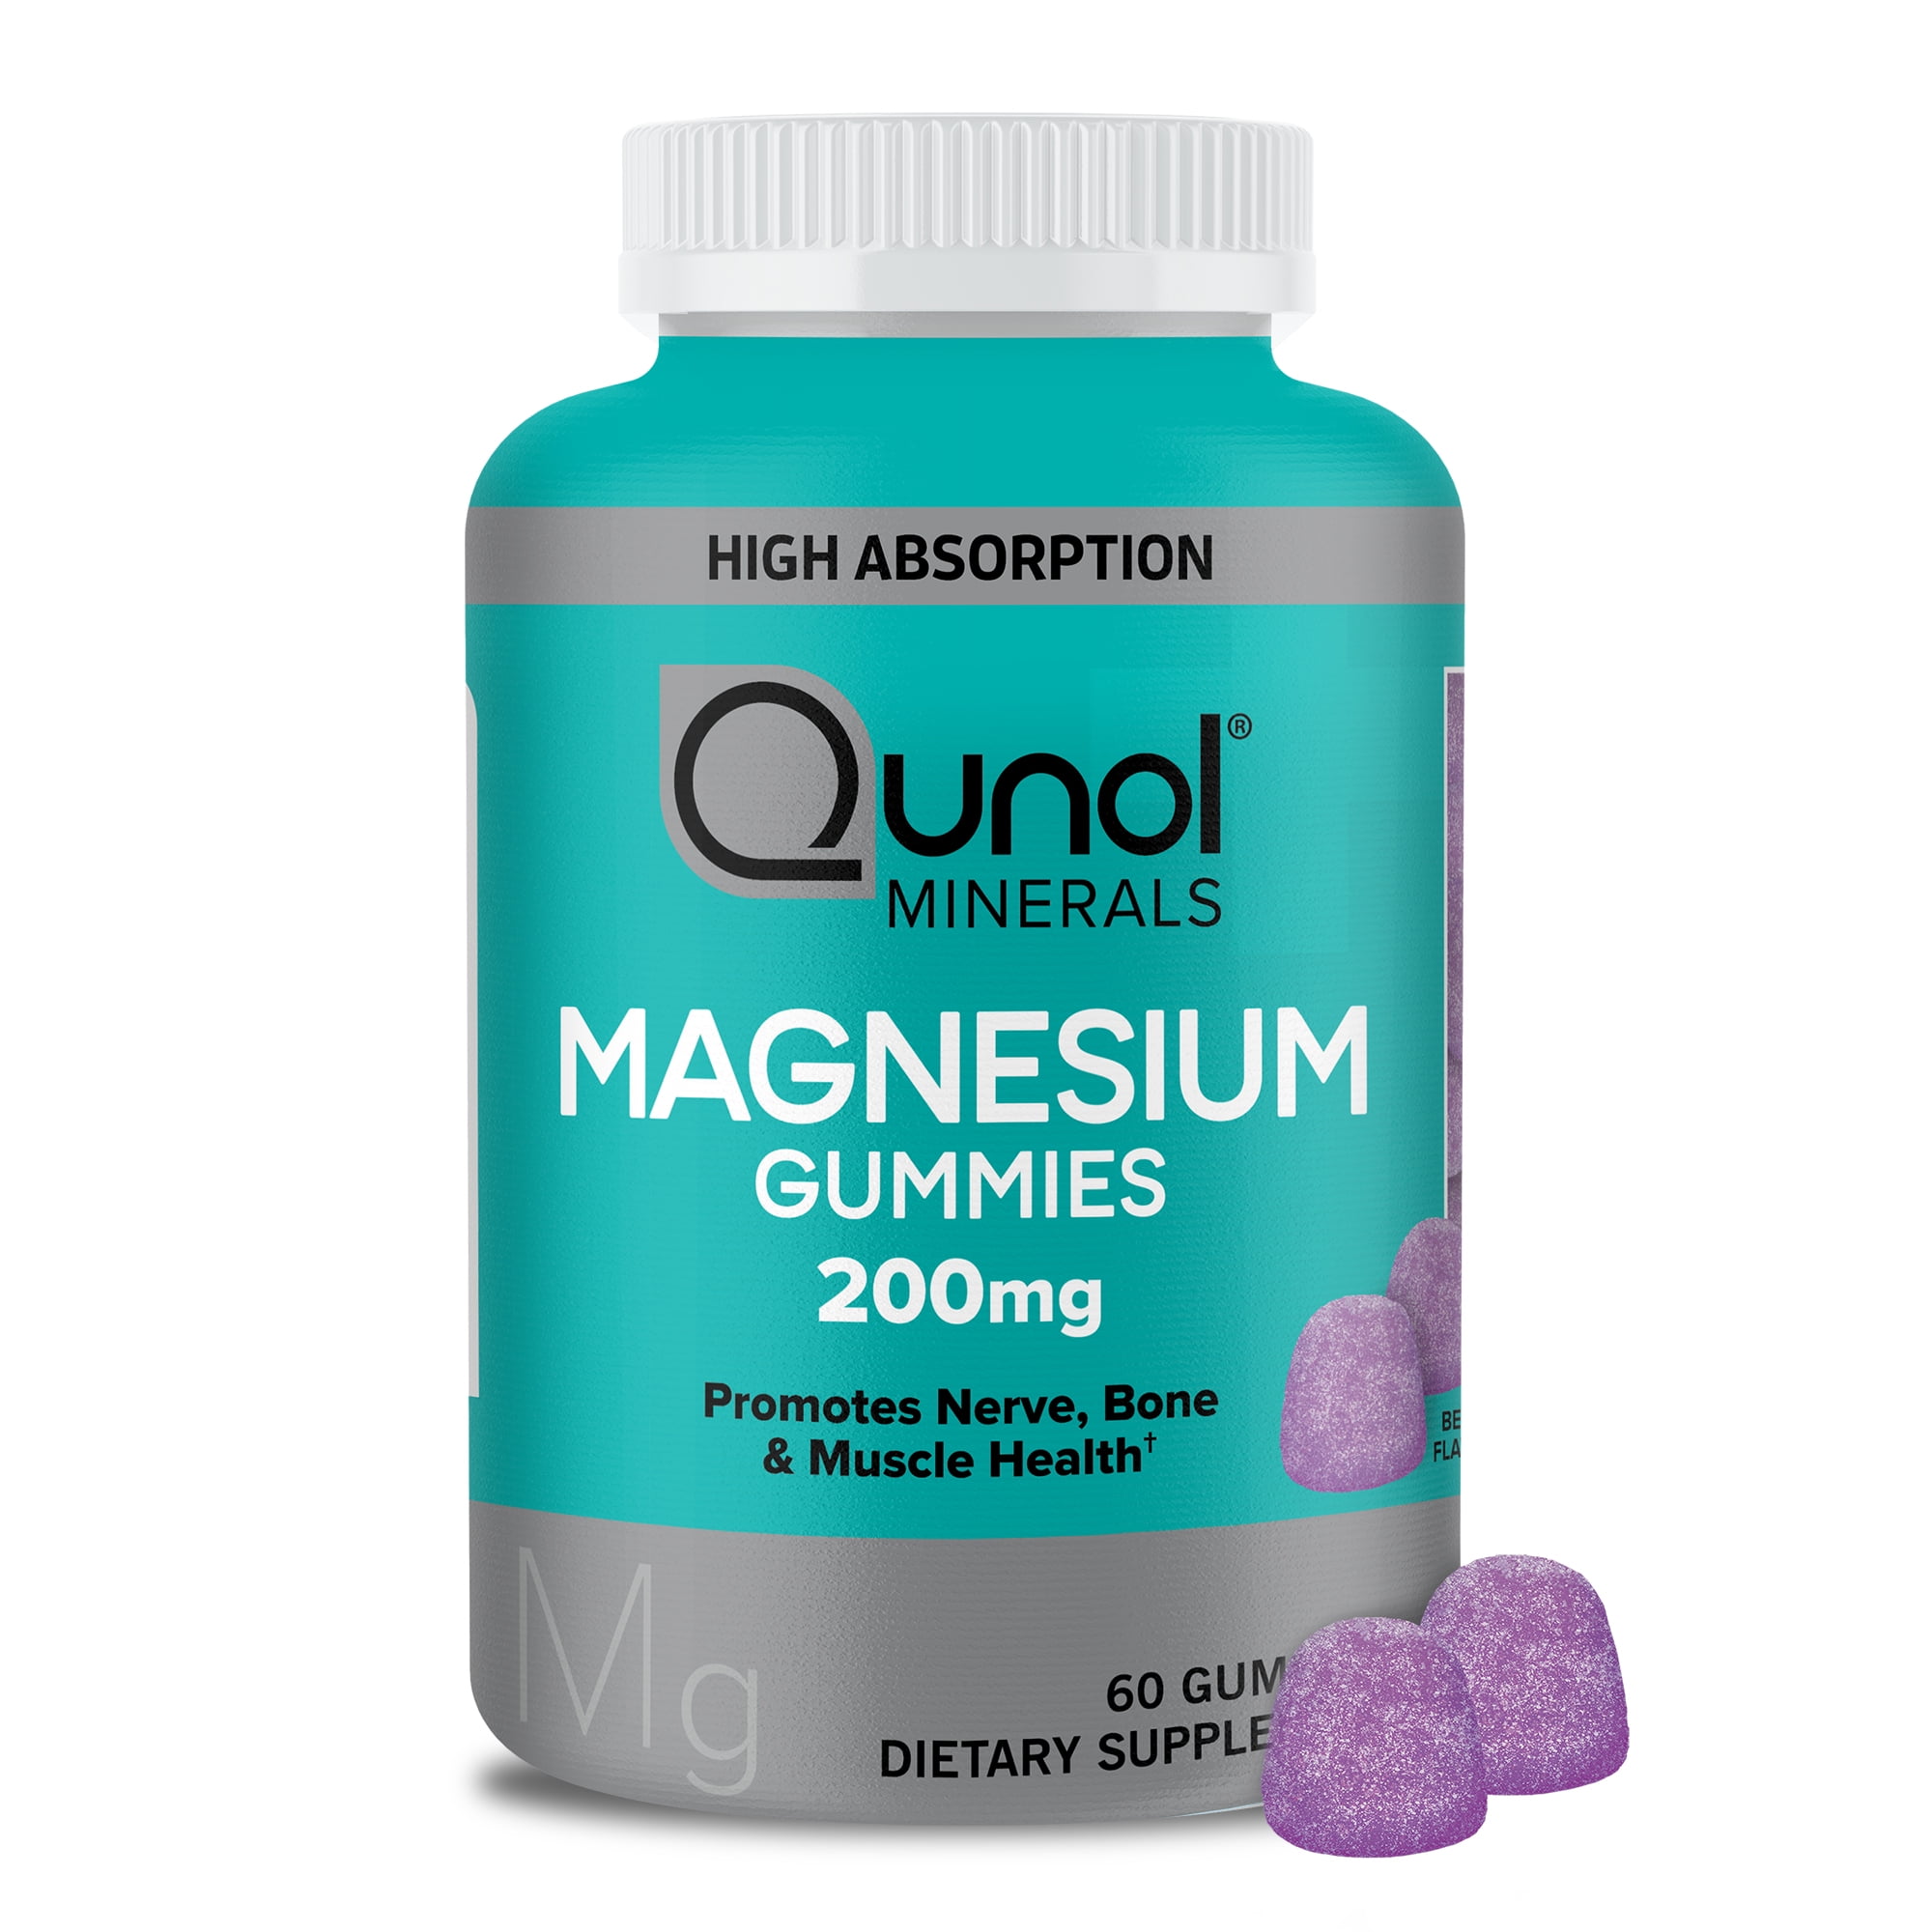 Qunol Magnesium Citrate Gummies (60 Count) 200mg with High Absorption, Bone, Nerve, and Muscle Health Supplement